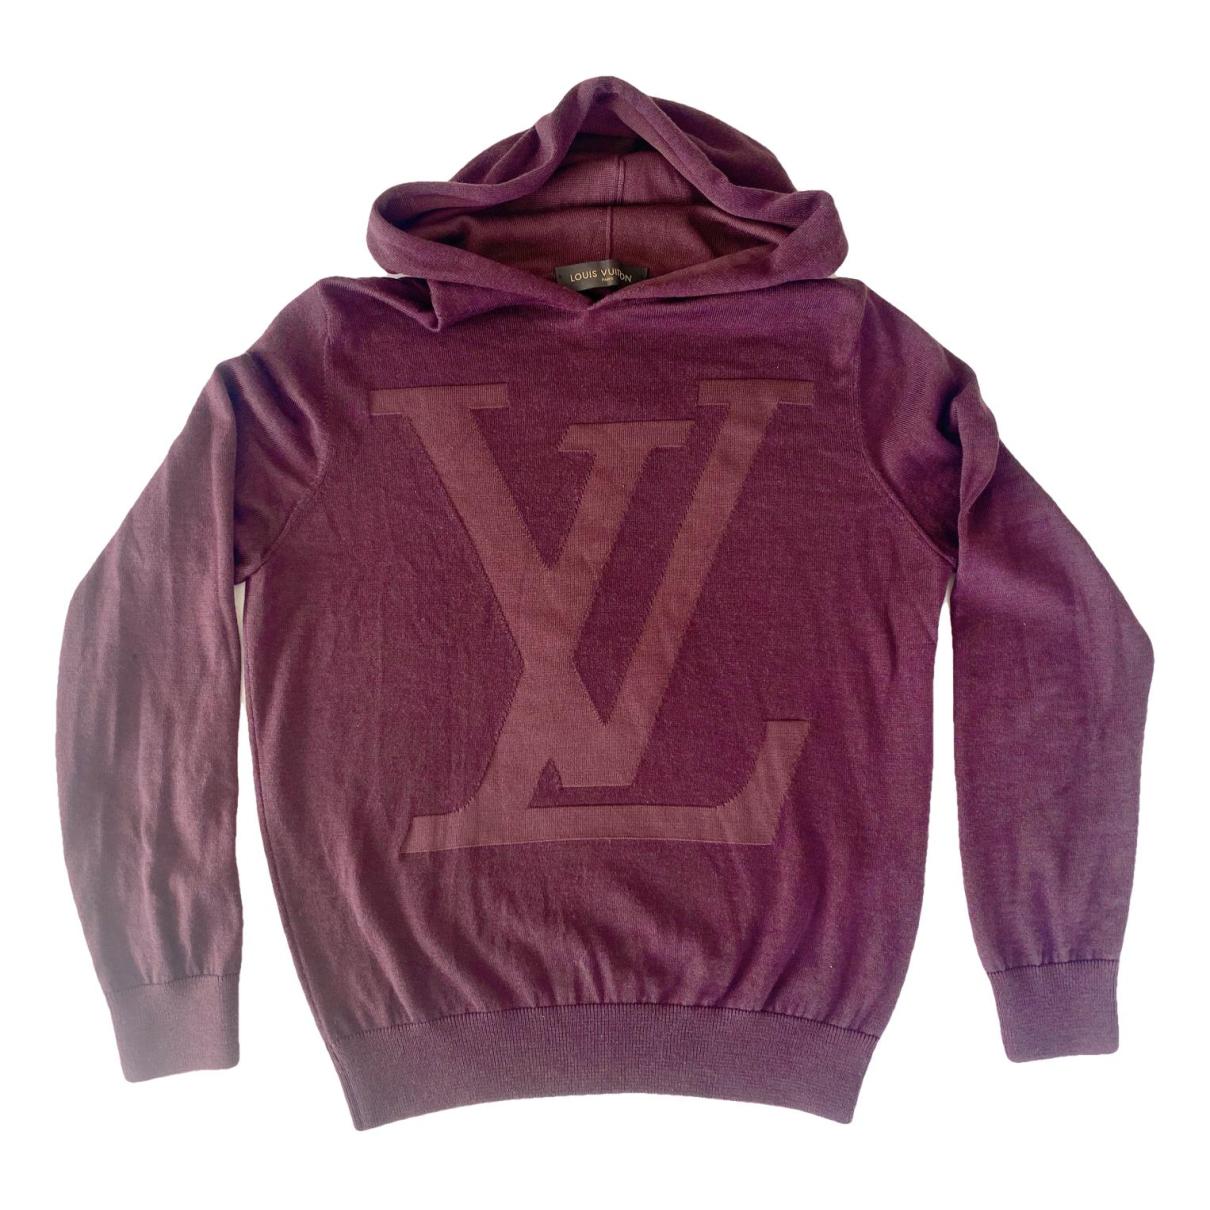 Louis Vuitton hoodie in grey cashmere with black fur lining ref